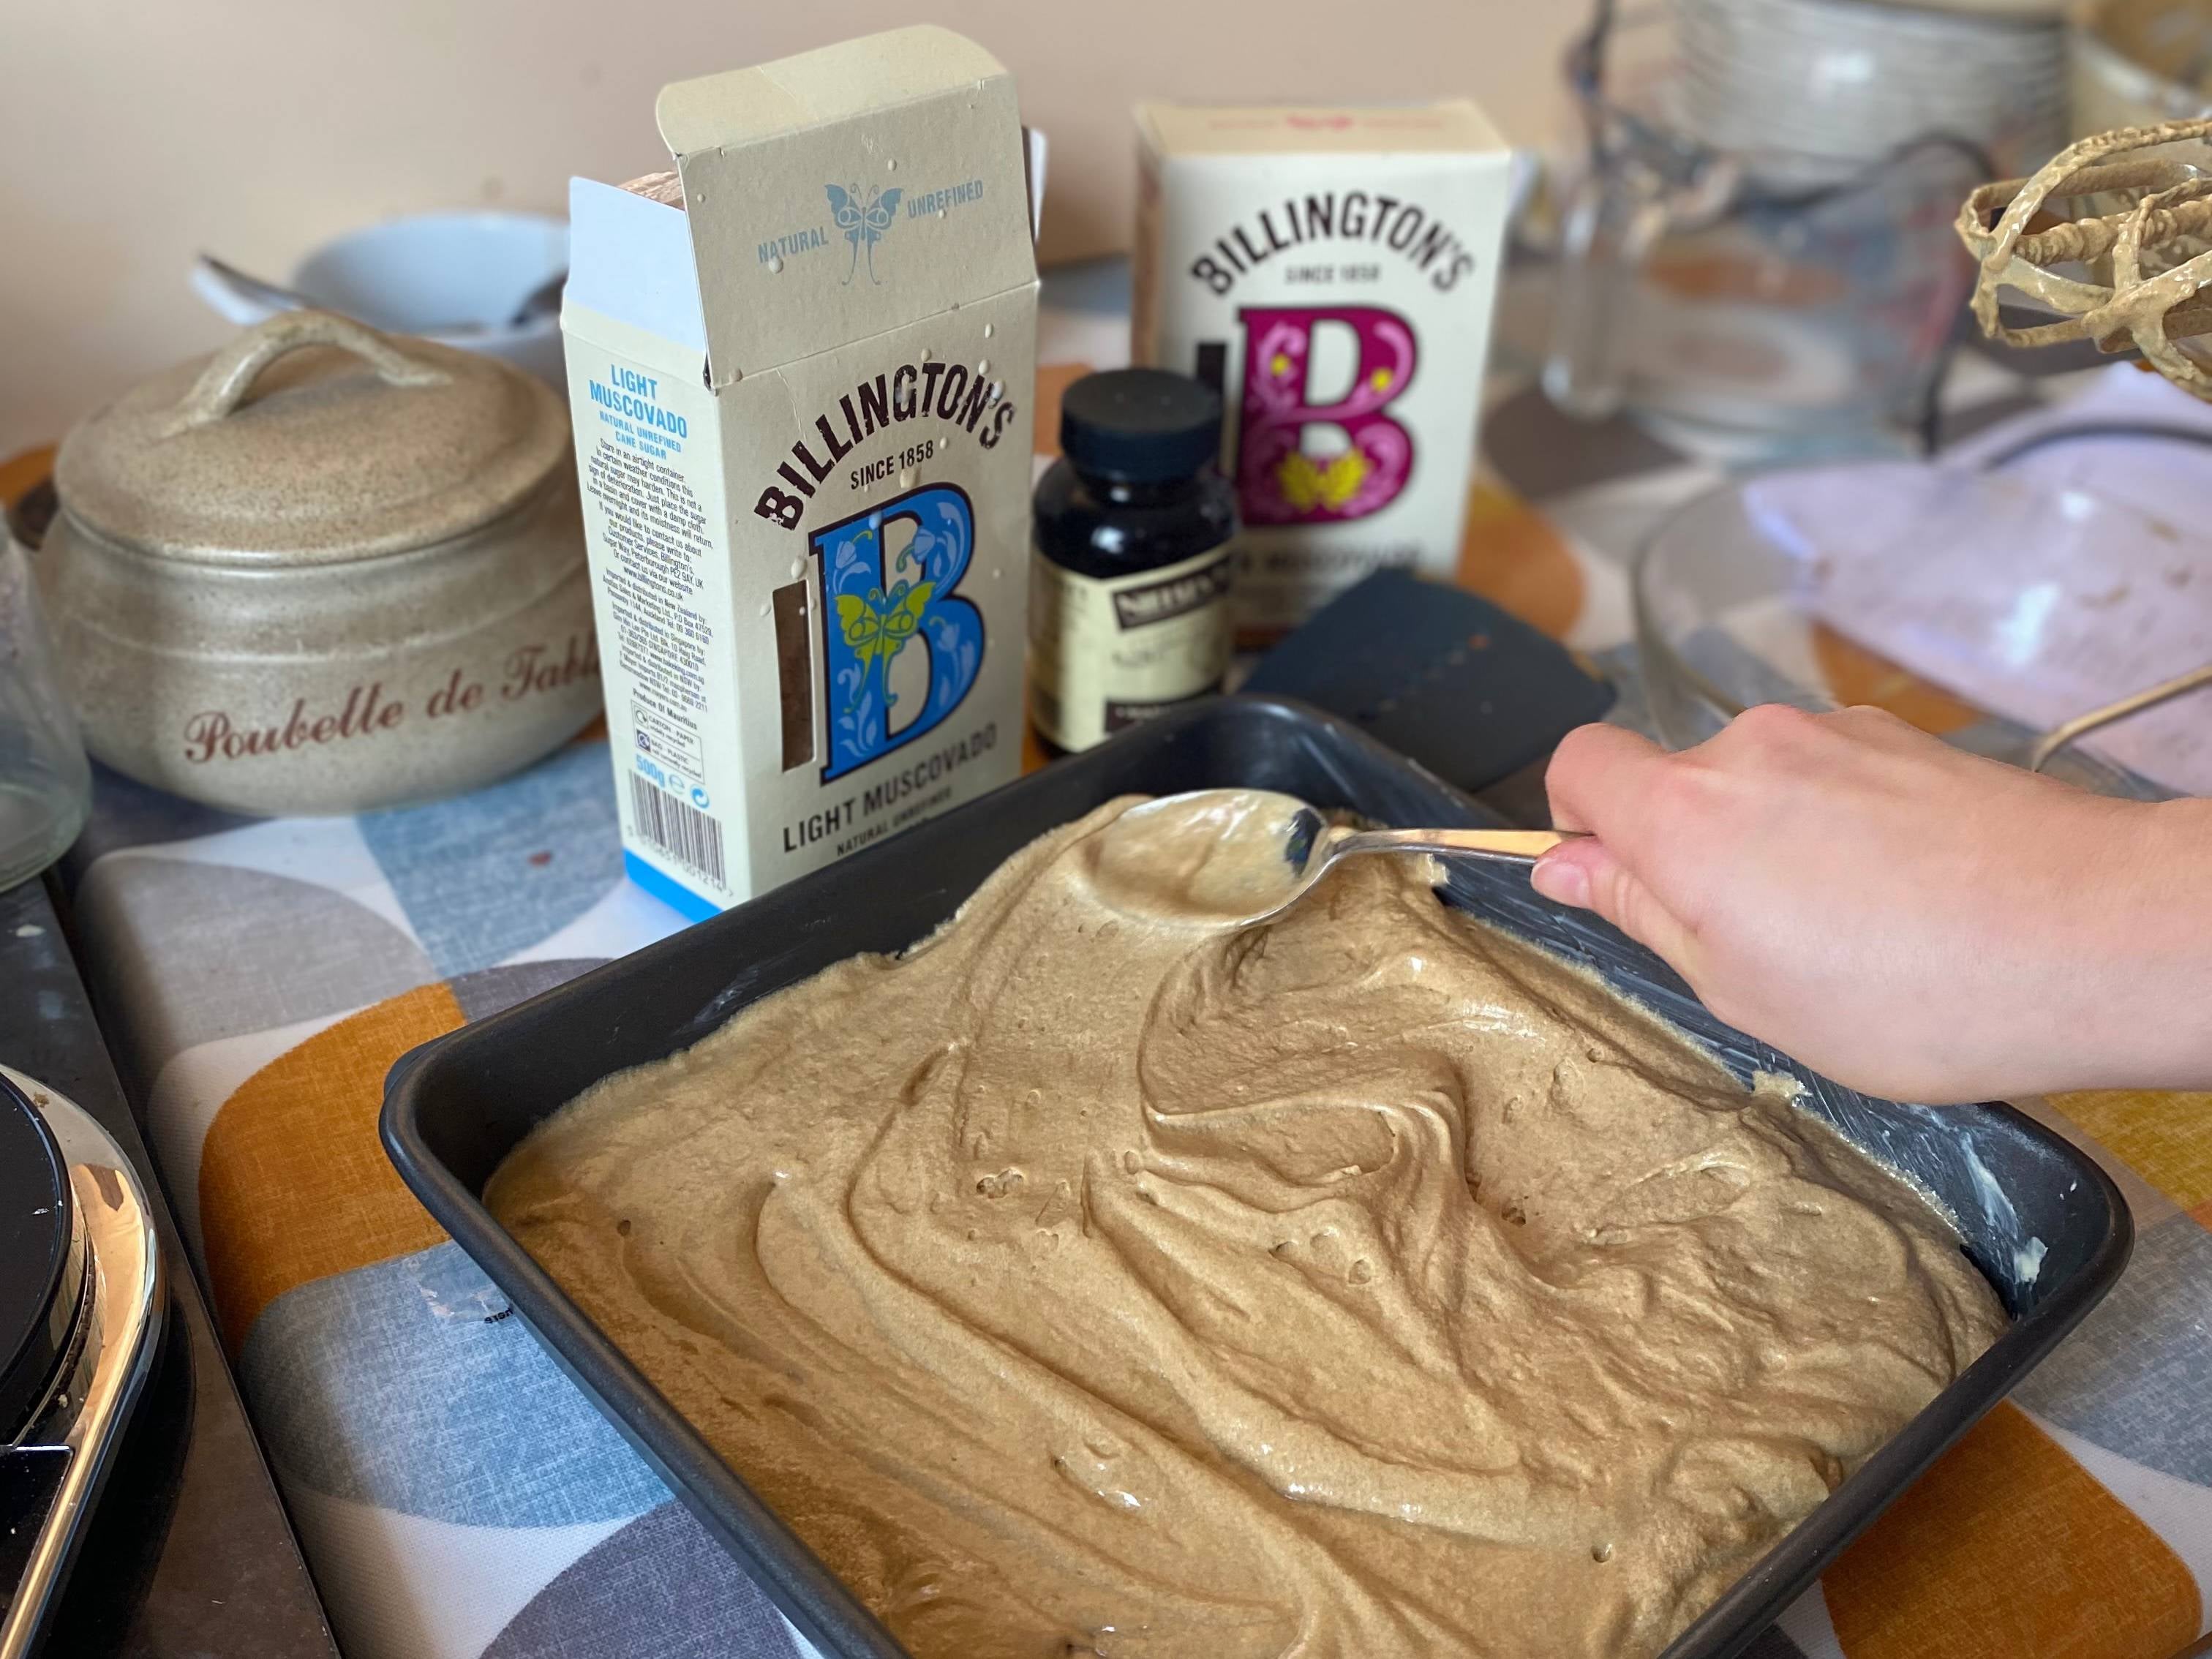 Smoothing out the cake mixture for Mary Berry and Nigella's sticky toffee pudding with Billington's Muscovado Sugar